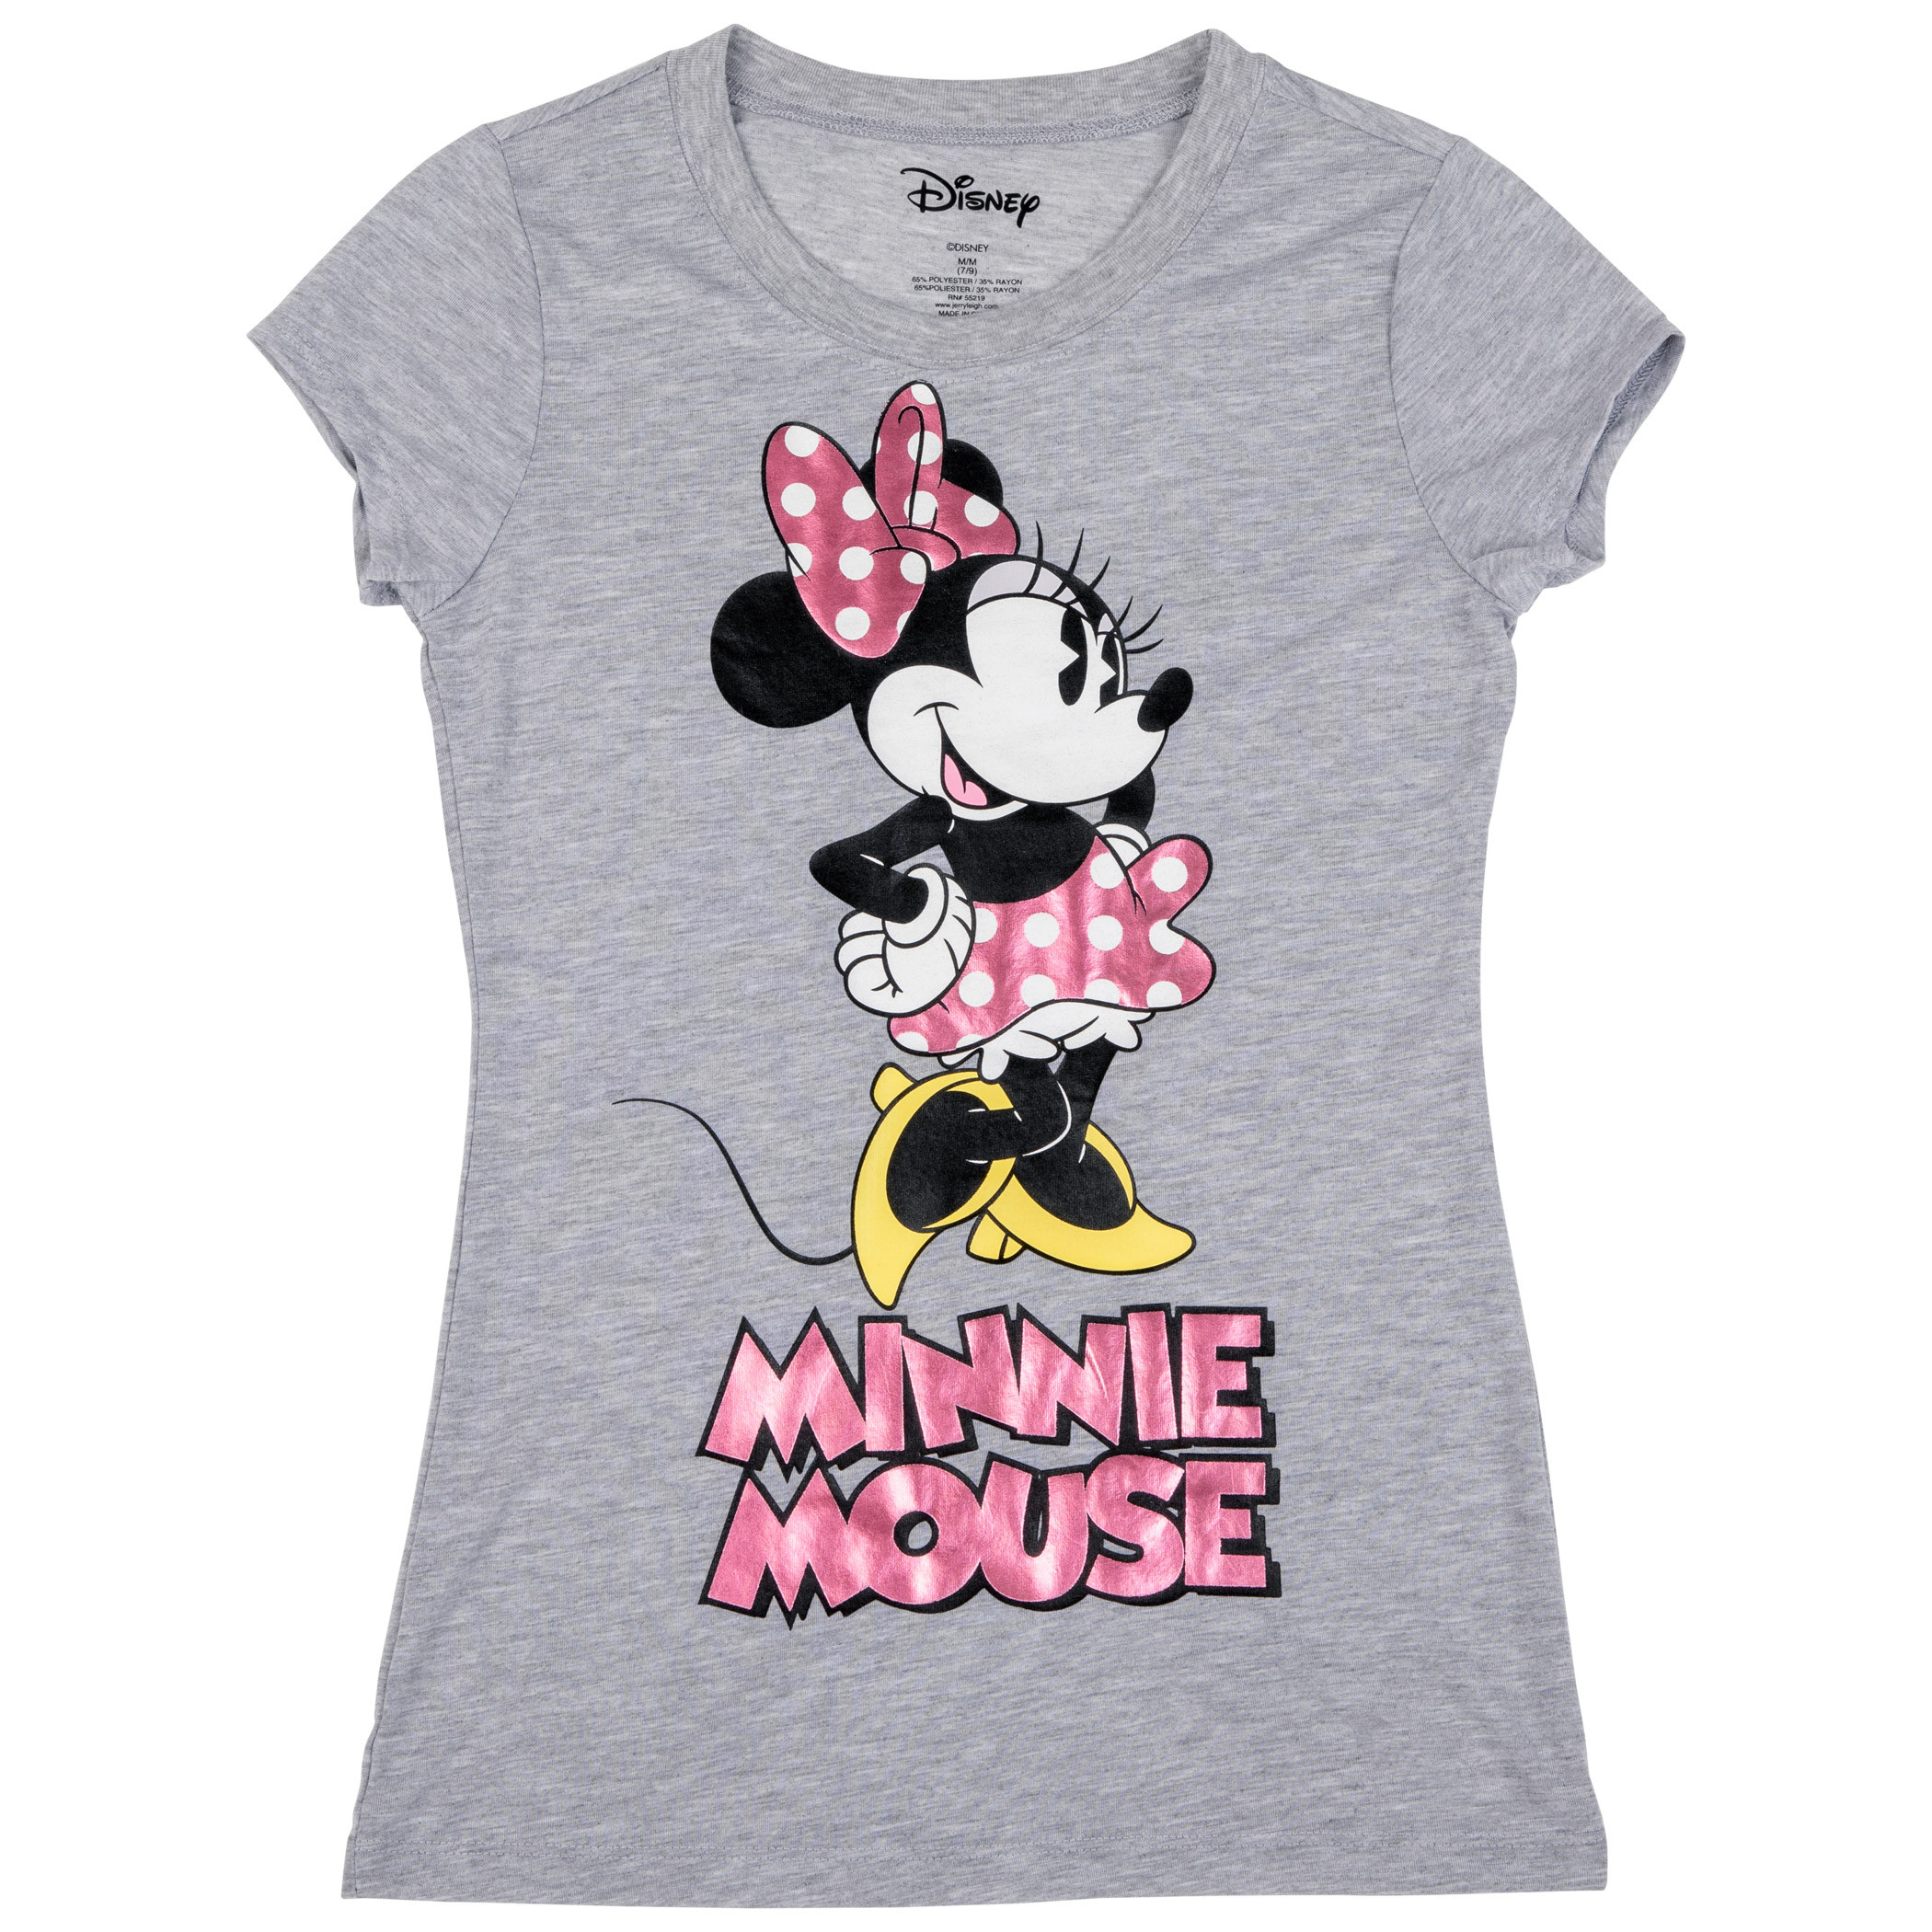 Minnie Mouse Disney Character Junior T-Shirt